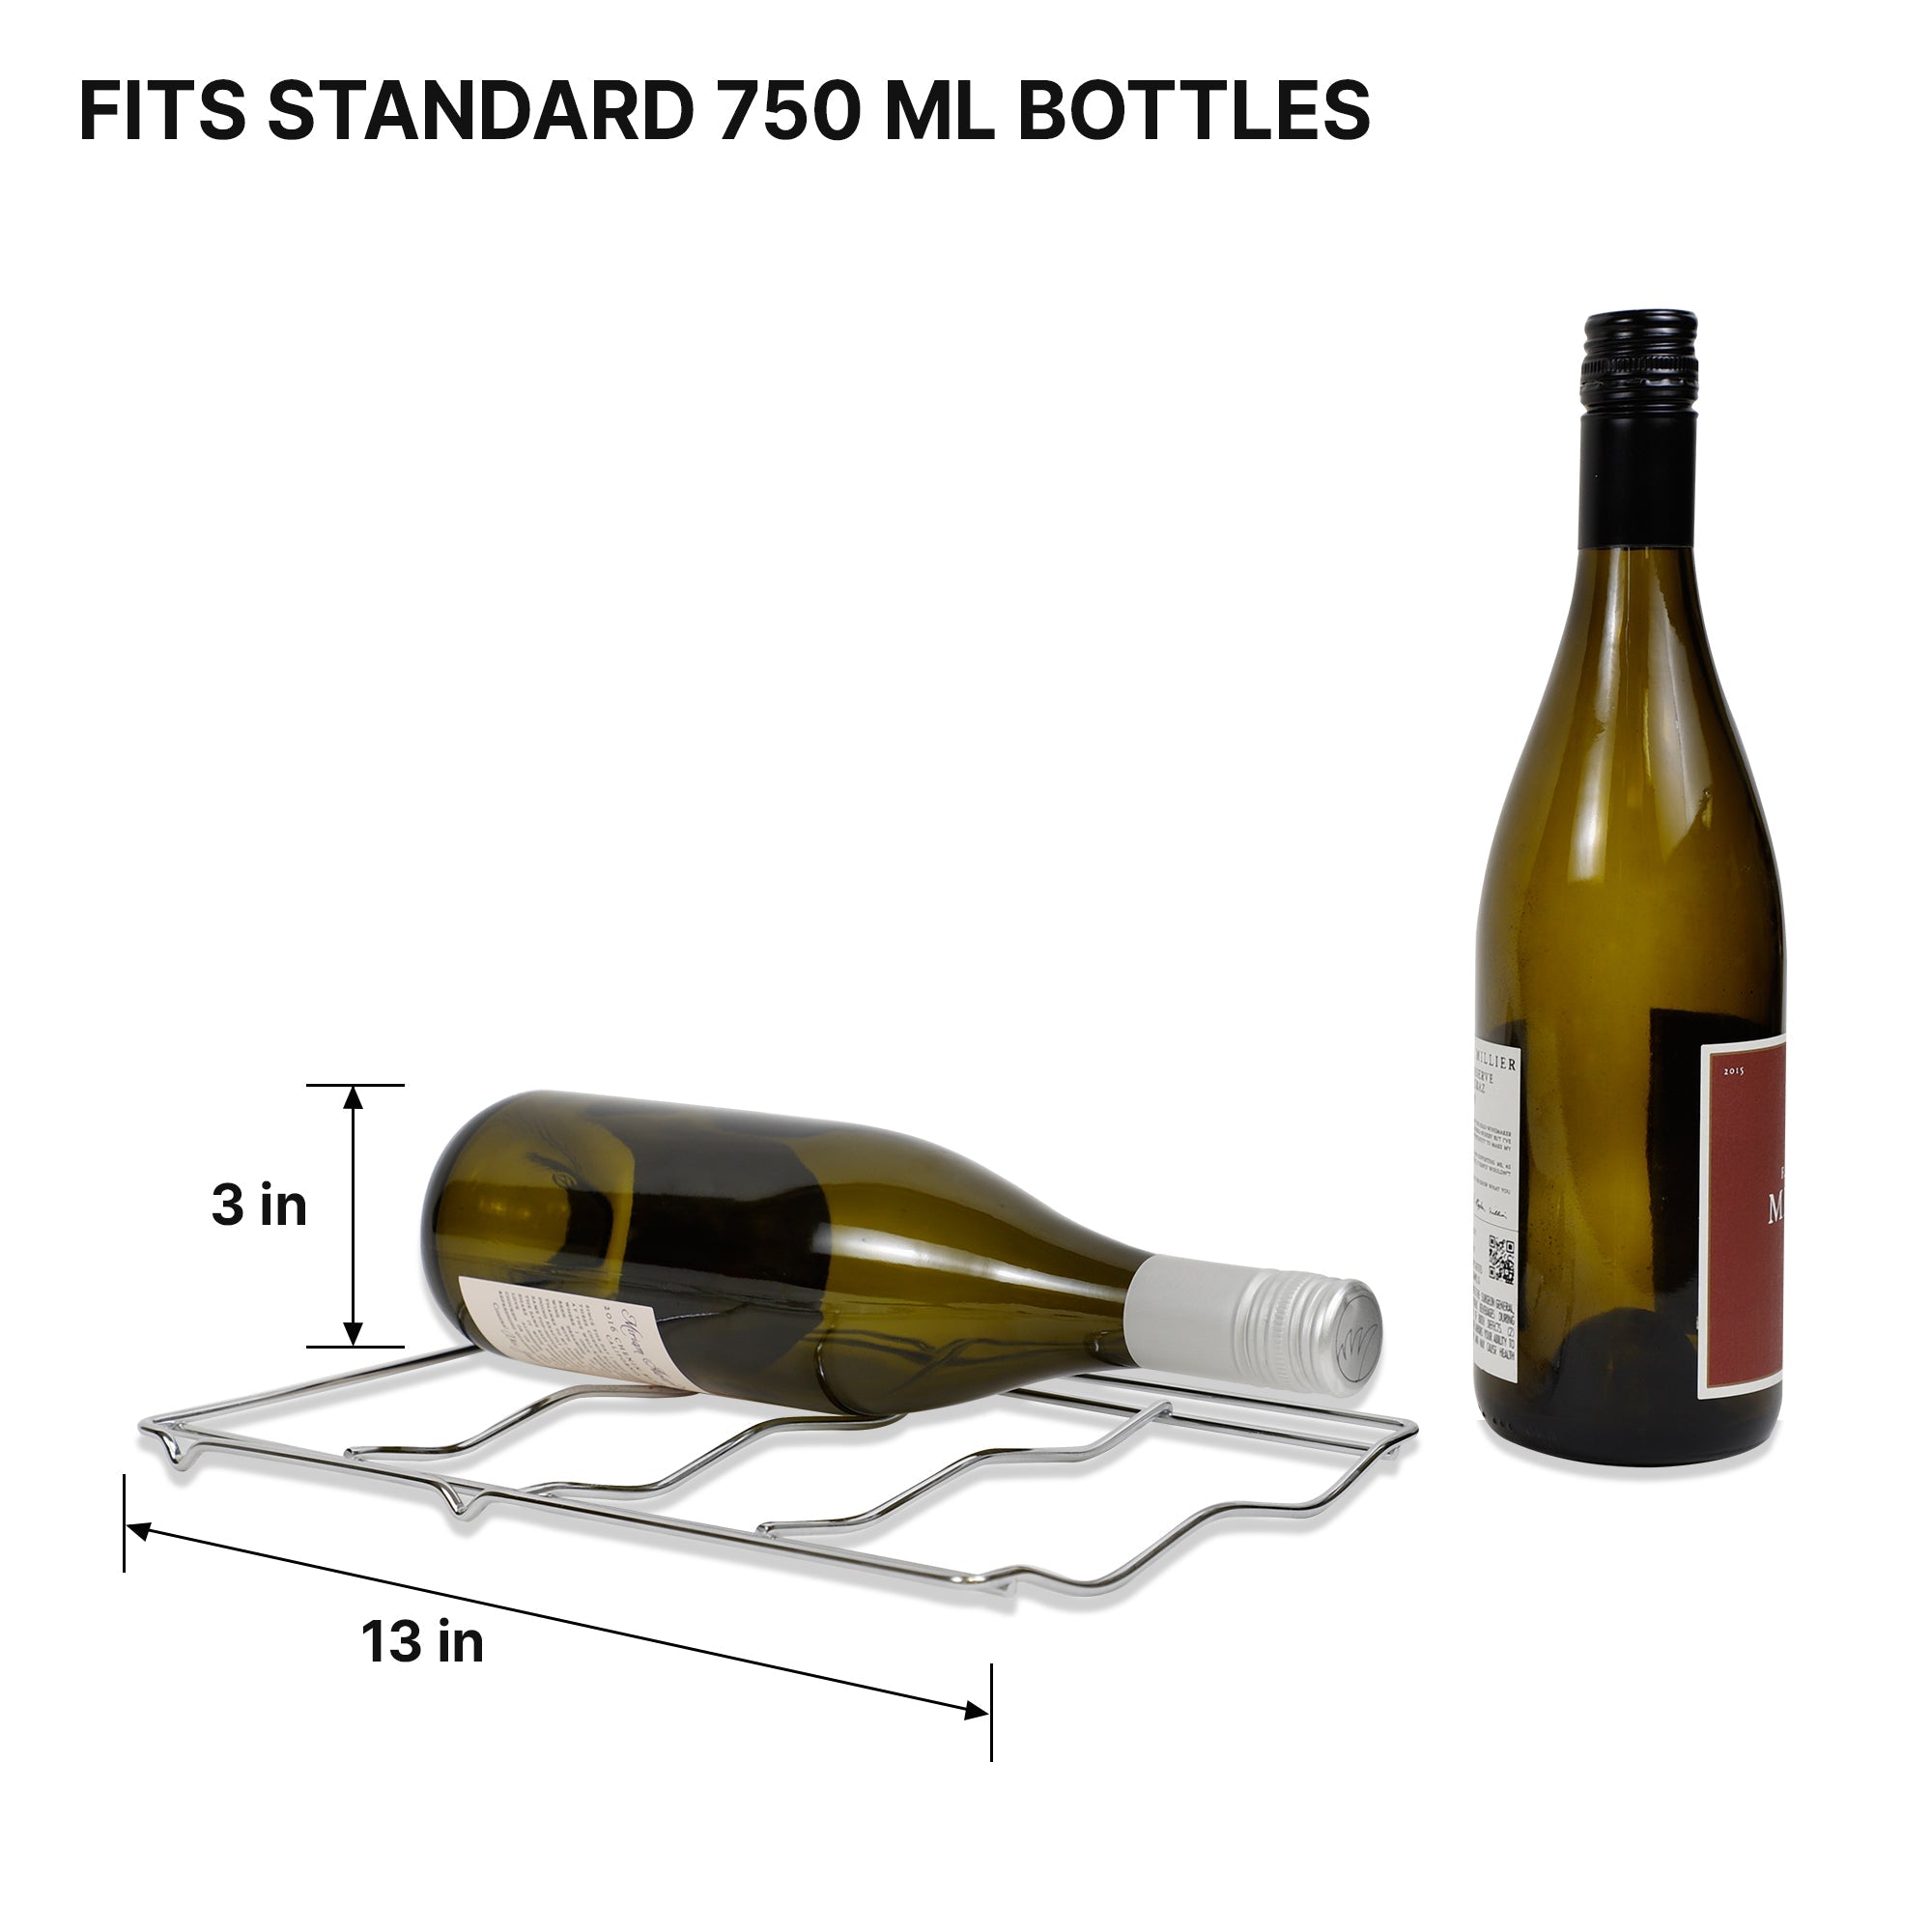 Removable wire rack from Koolatron 8 bottle wine chiller with dimensions listed and one wine bottle lying on it and one standing up beside it. Text above reads "Fits standard 750 mL bottles"